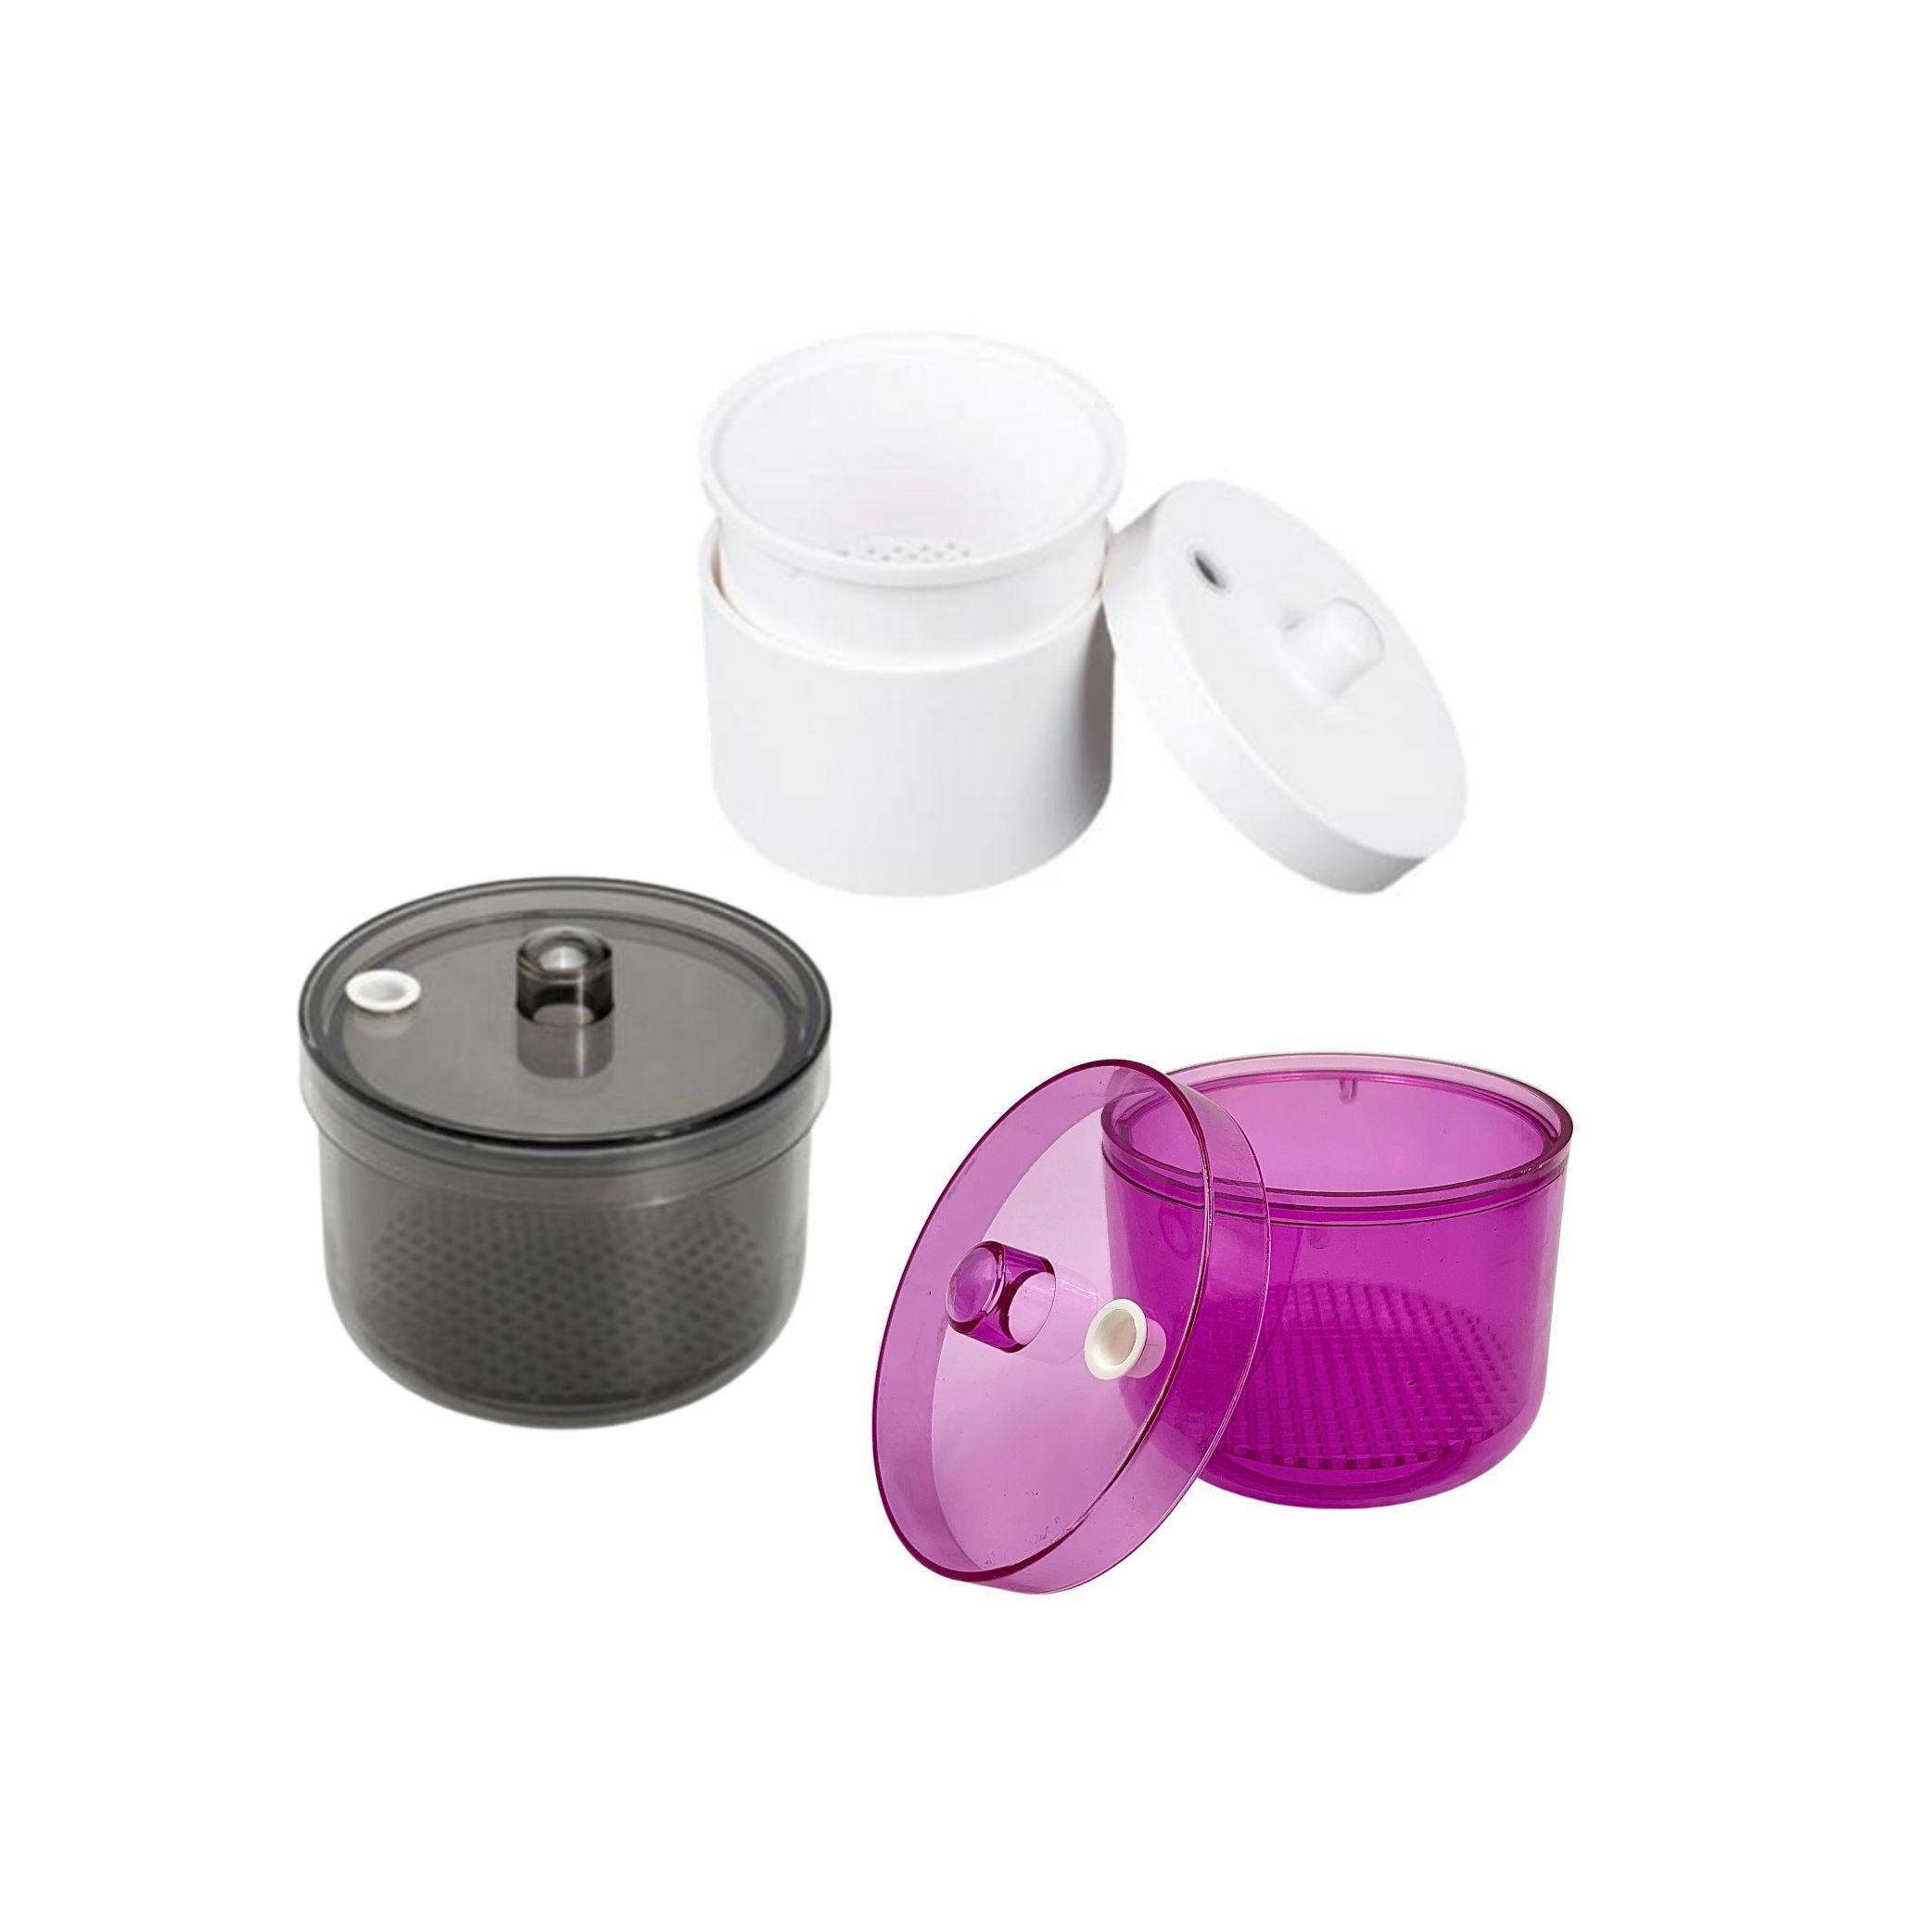 FLEX Beauty Disinfection & Storage Containers - The Beauty House Shop